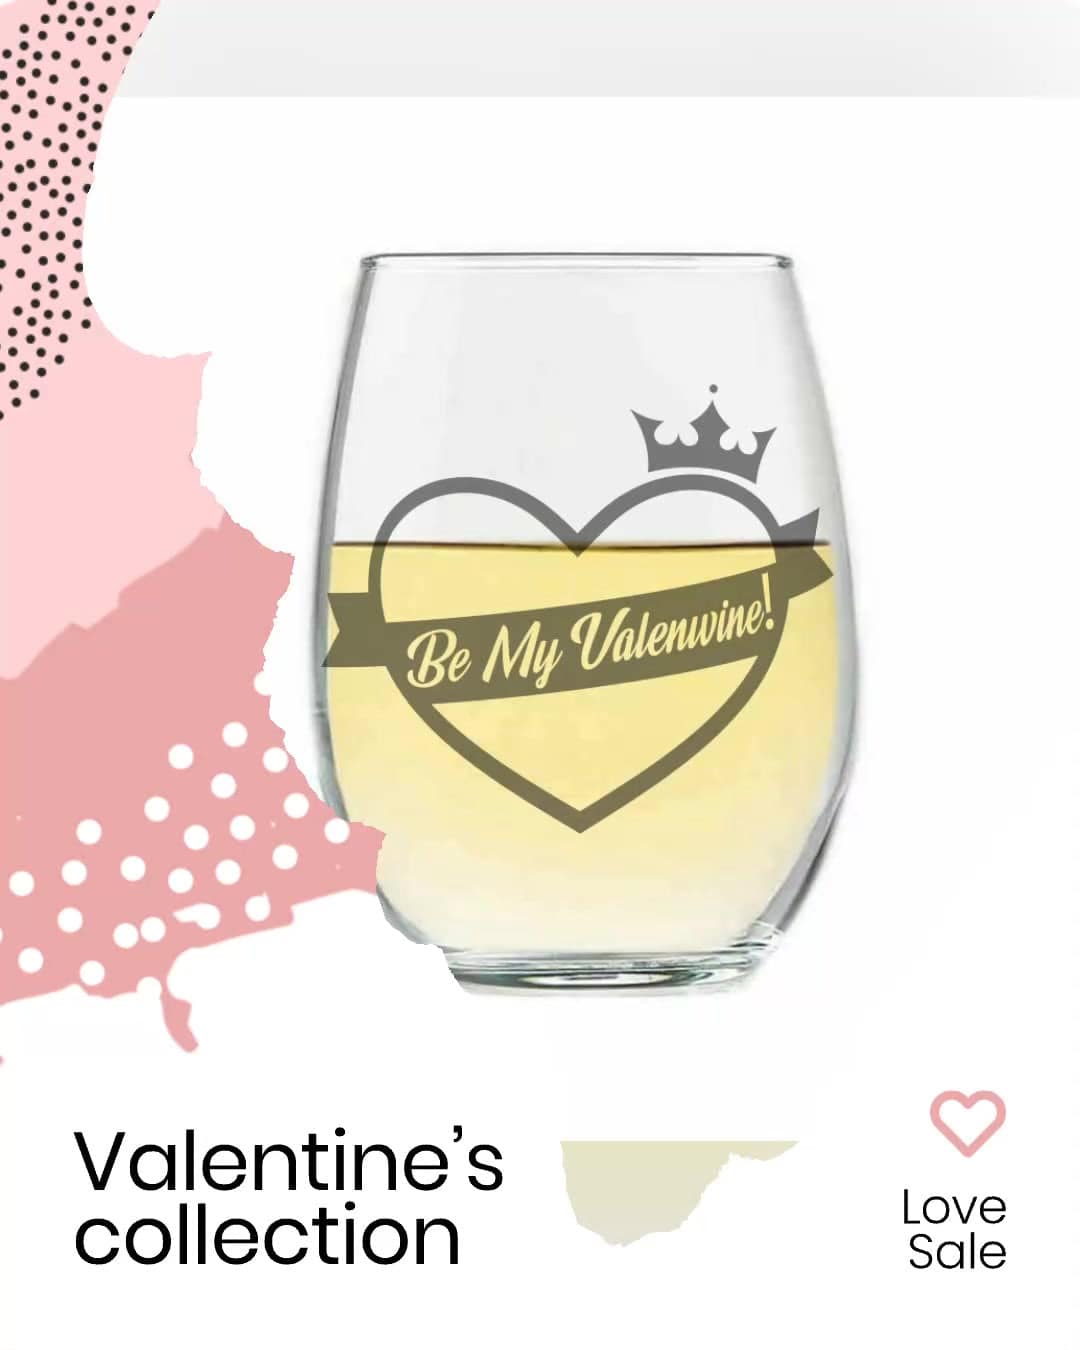 Etched Stemless Wine Glass Be my Valenwine 20.5oz Sweetheart Valentine’s Day Gift - Expressive DeZien 